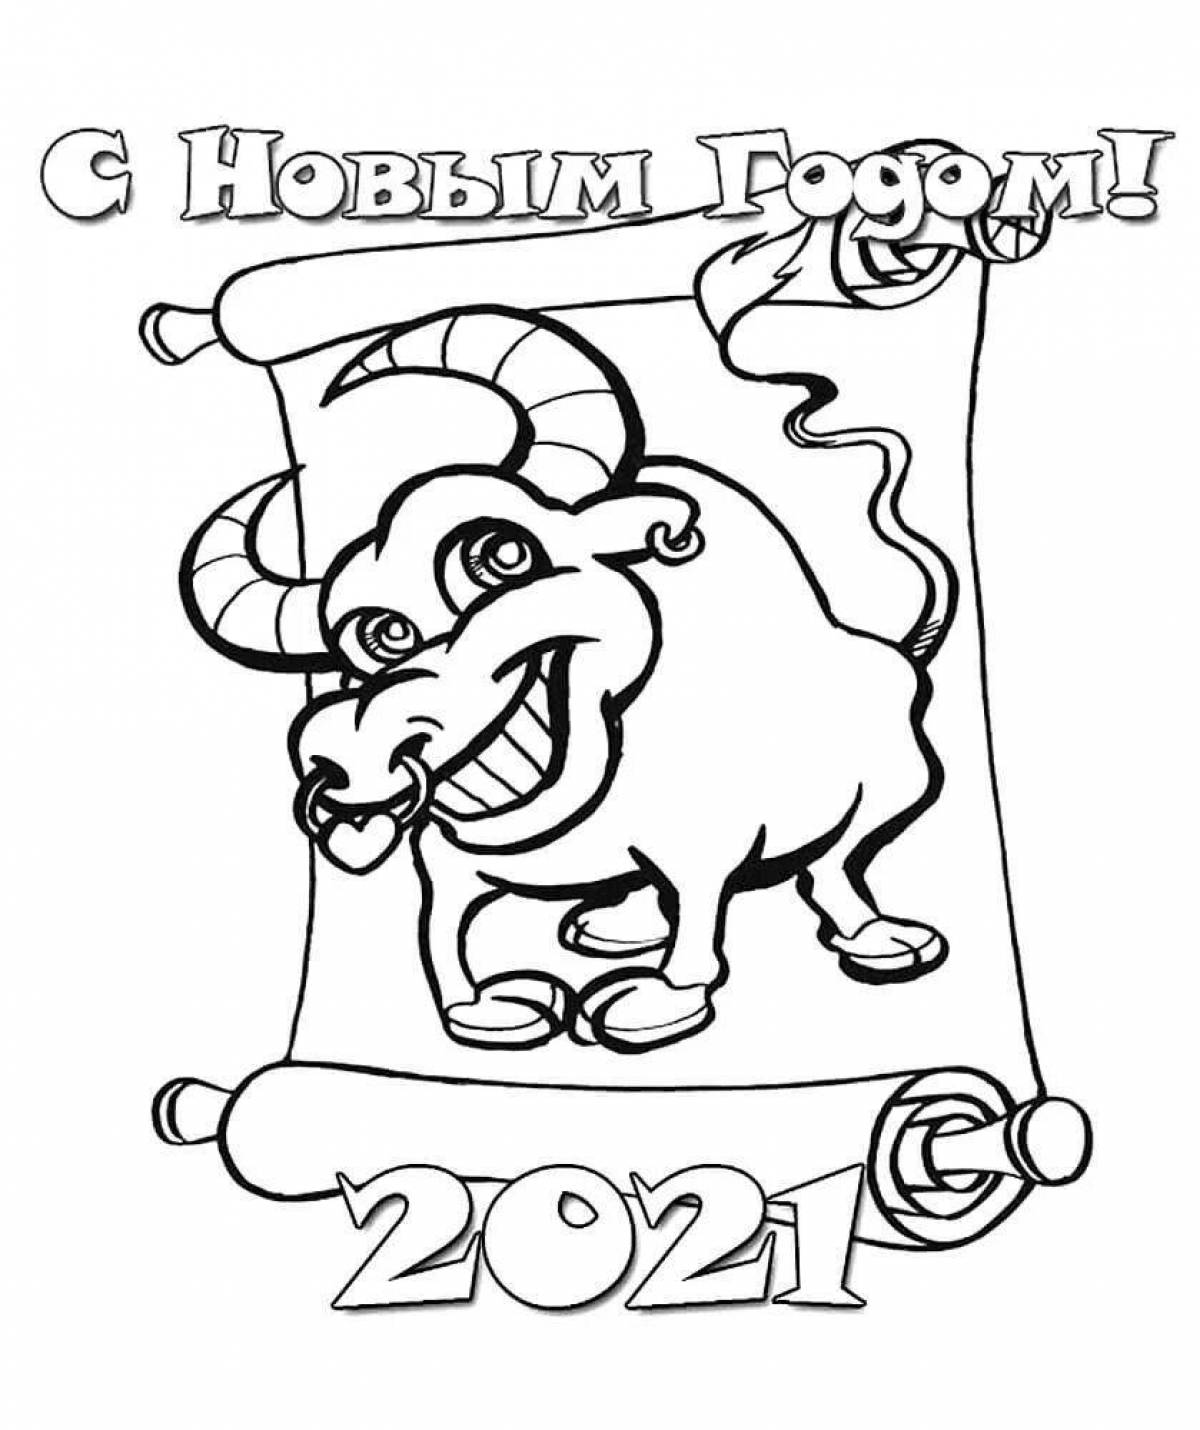 Coloring page living symbol of the year